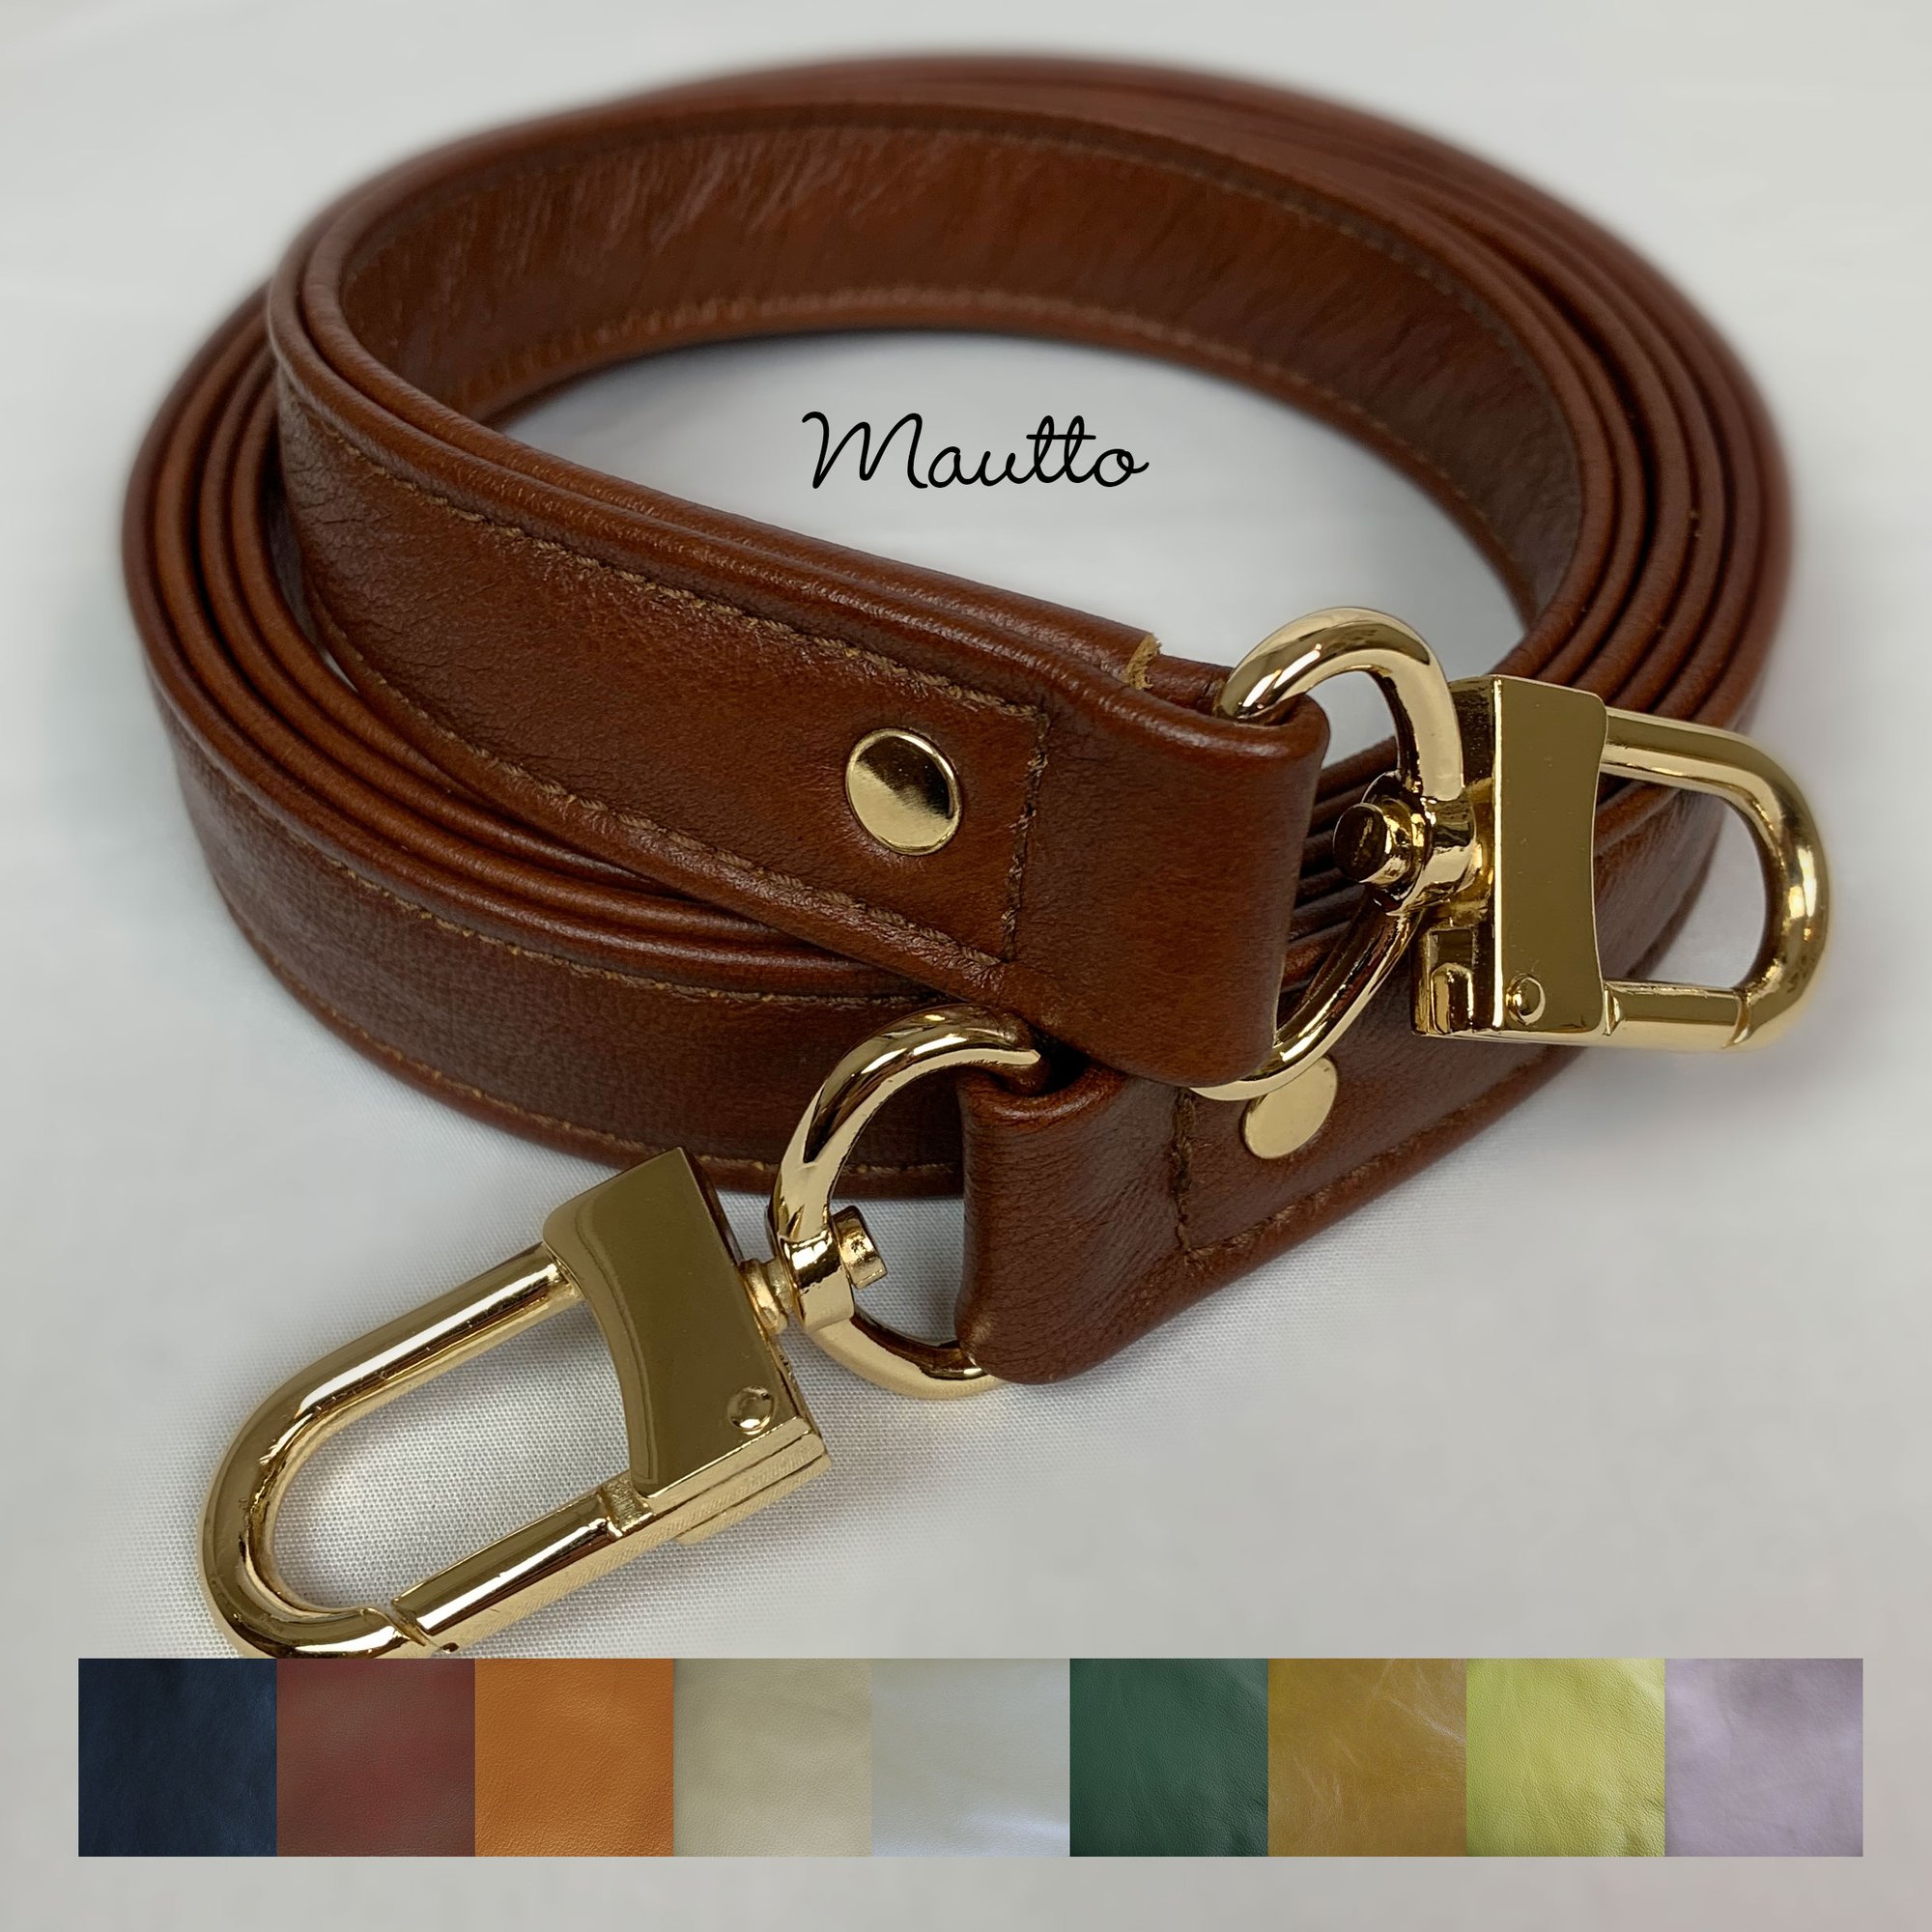 ON SALE! Genuine Leather Bag Strap - 1 Wide with Gold #16XLG Clips -  Choose Length & Leather Color